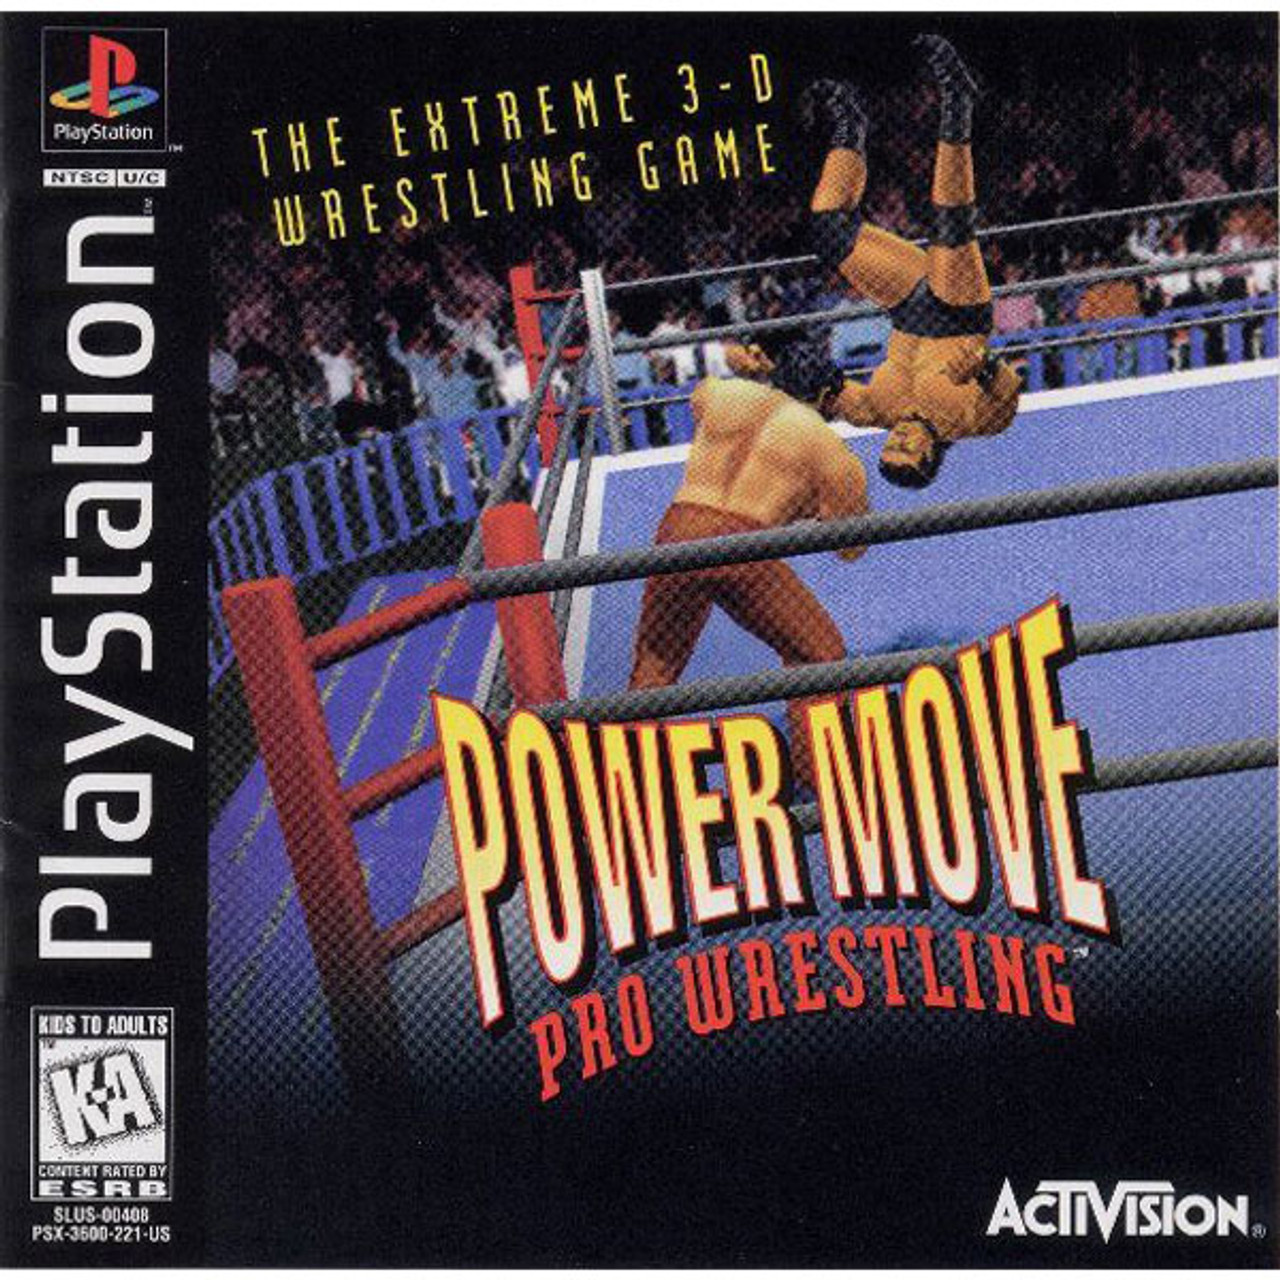 Powermove Pro Wrestling for the Sony Playstation on Behance